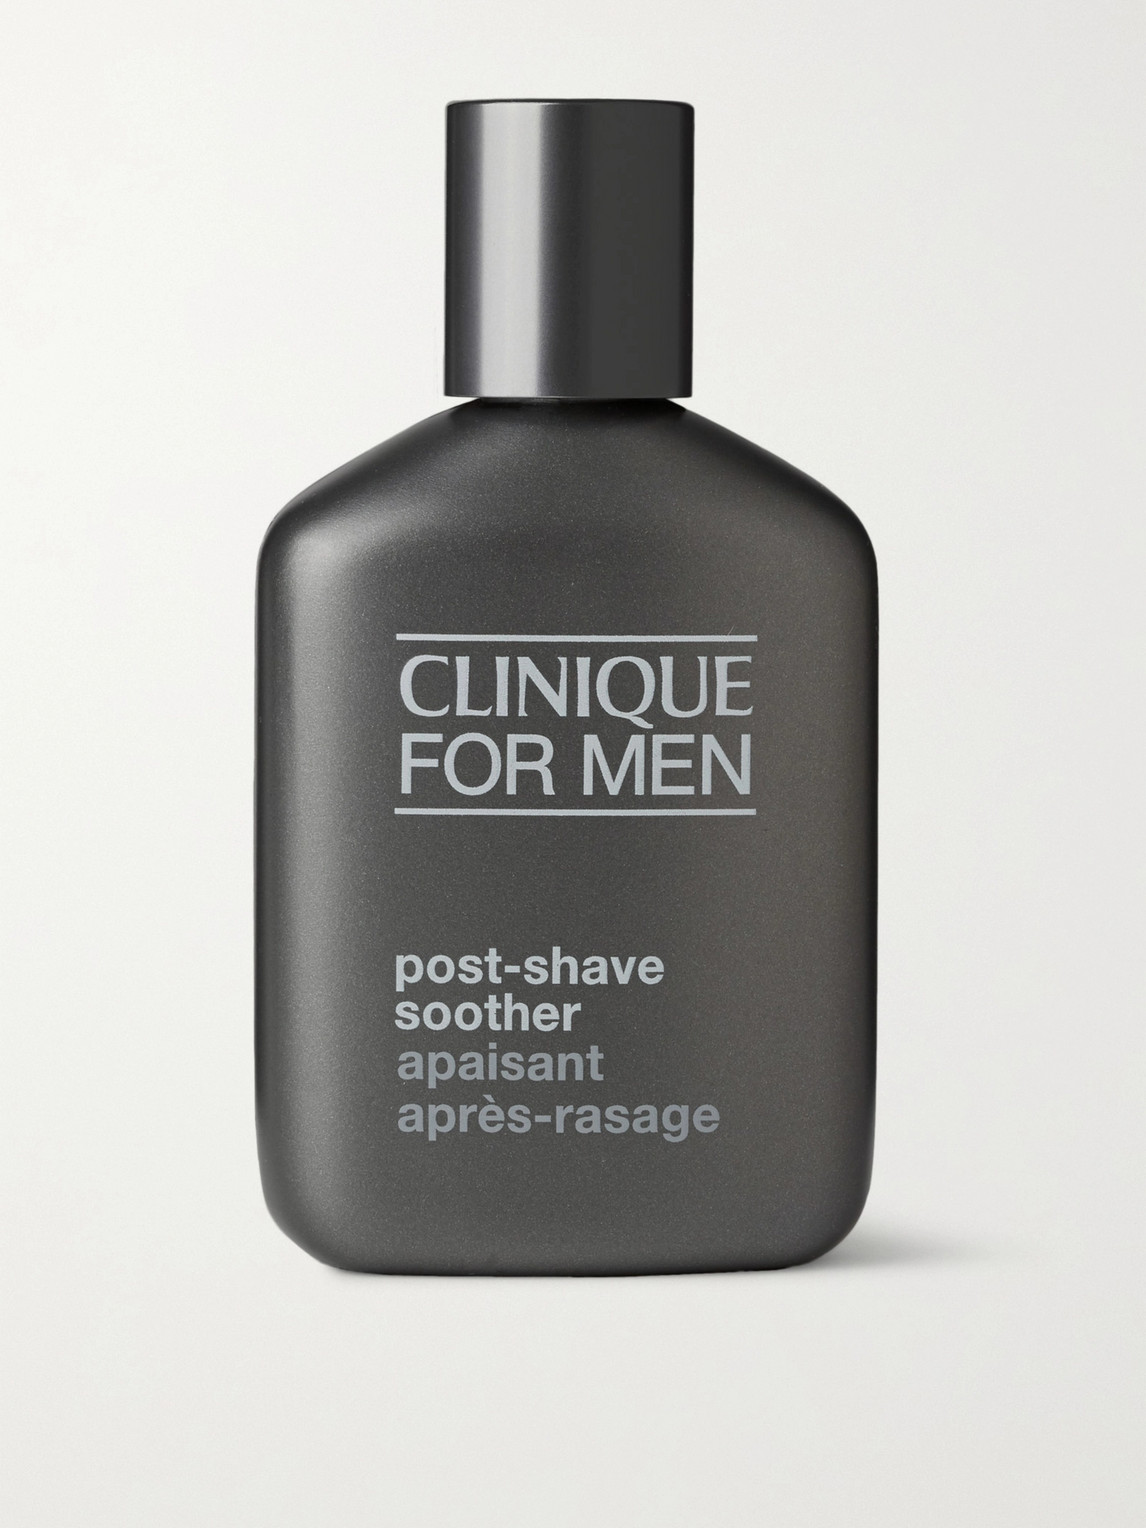 CLINIQUE POST-SHAVE SOOTHER, 75ML